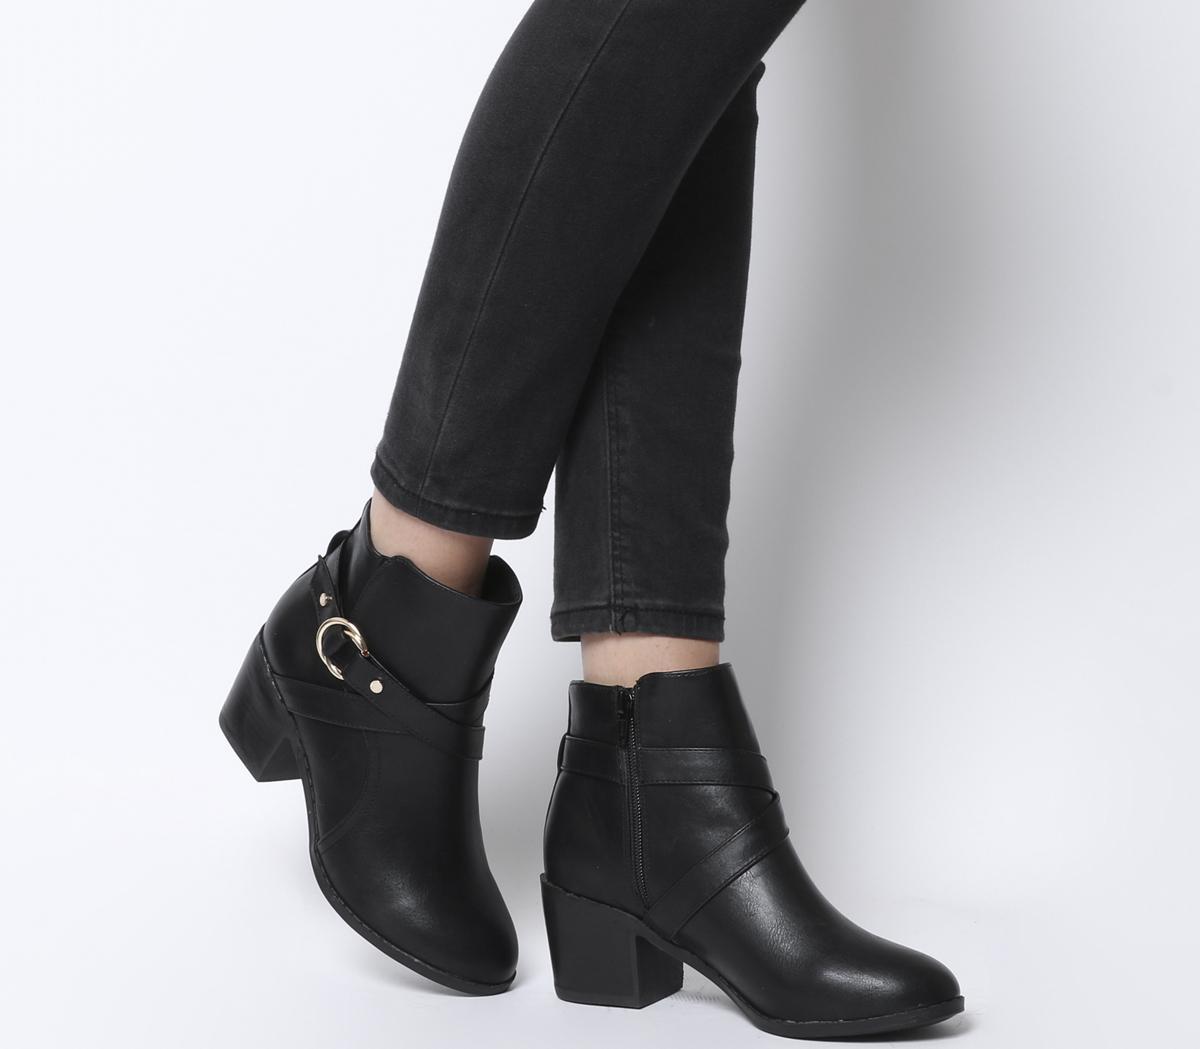 Office Angelina Block Heel Strap Ankle Boots Black - Ankle Boots